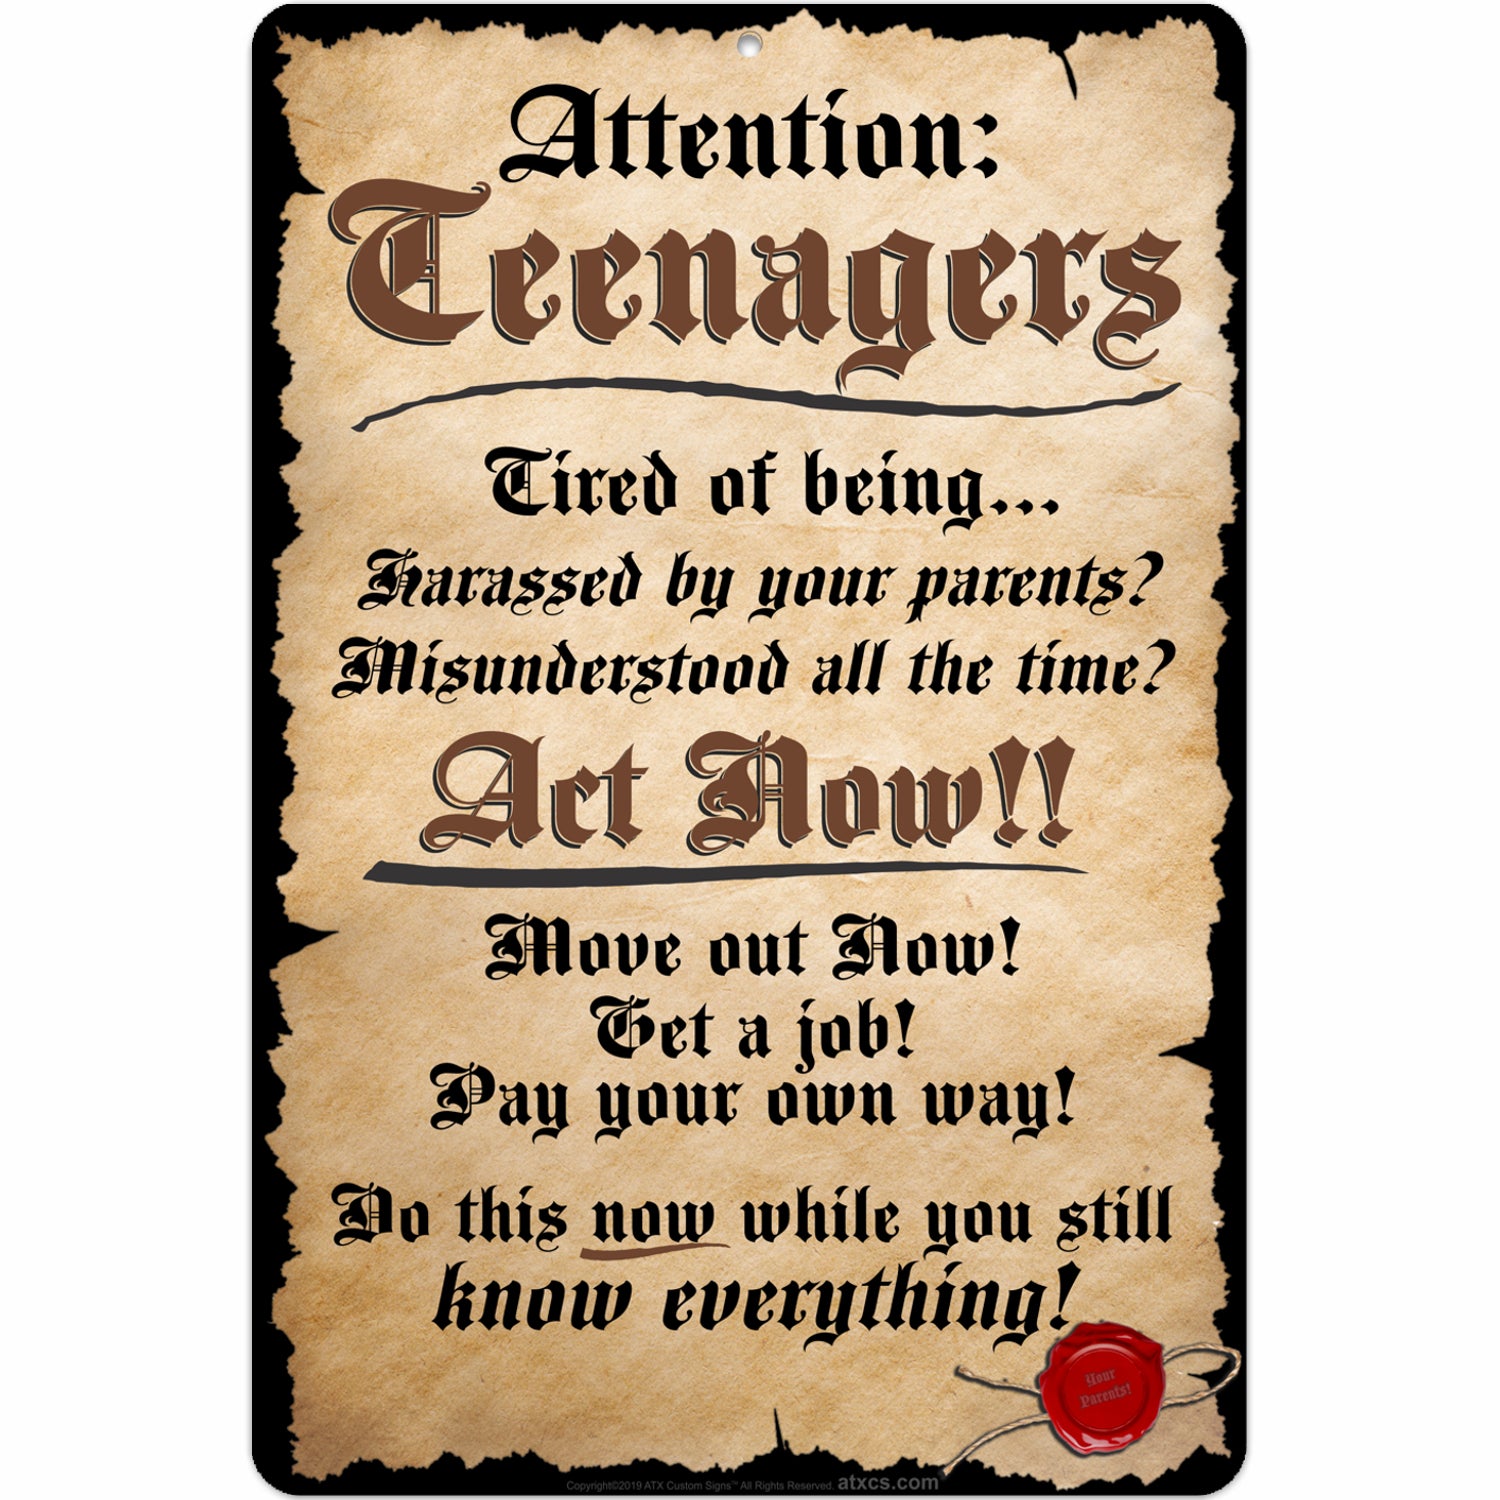 Attention: Teenagers Tired of being harassed, misunderstood Act Now!